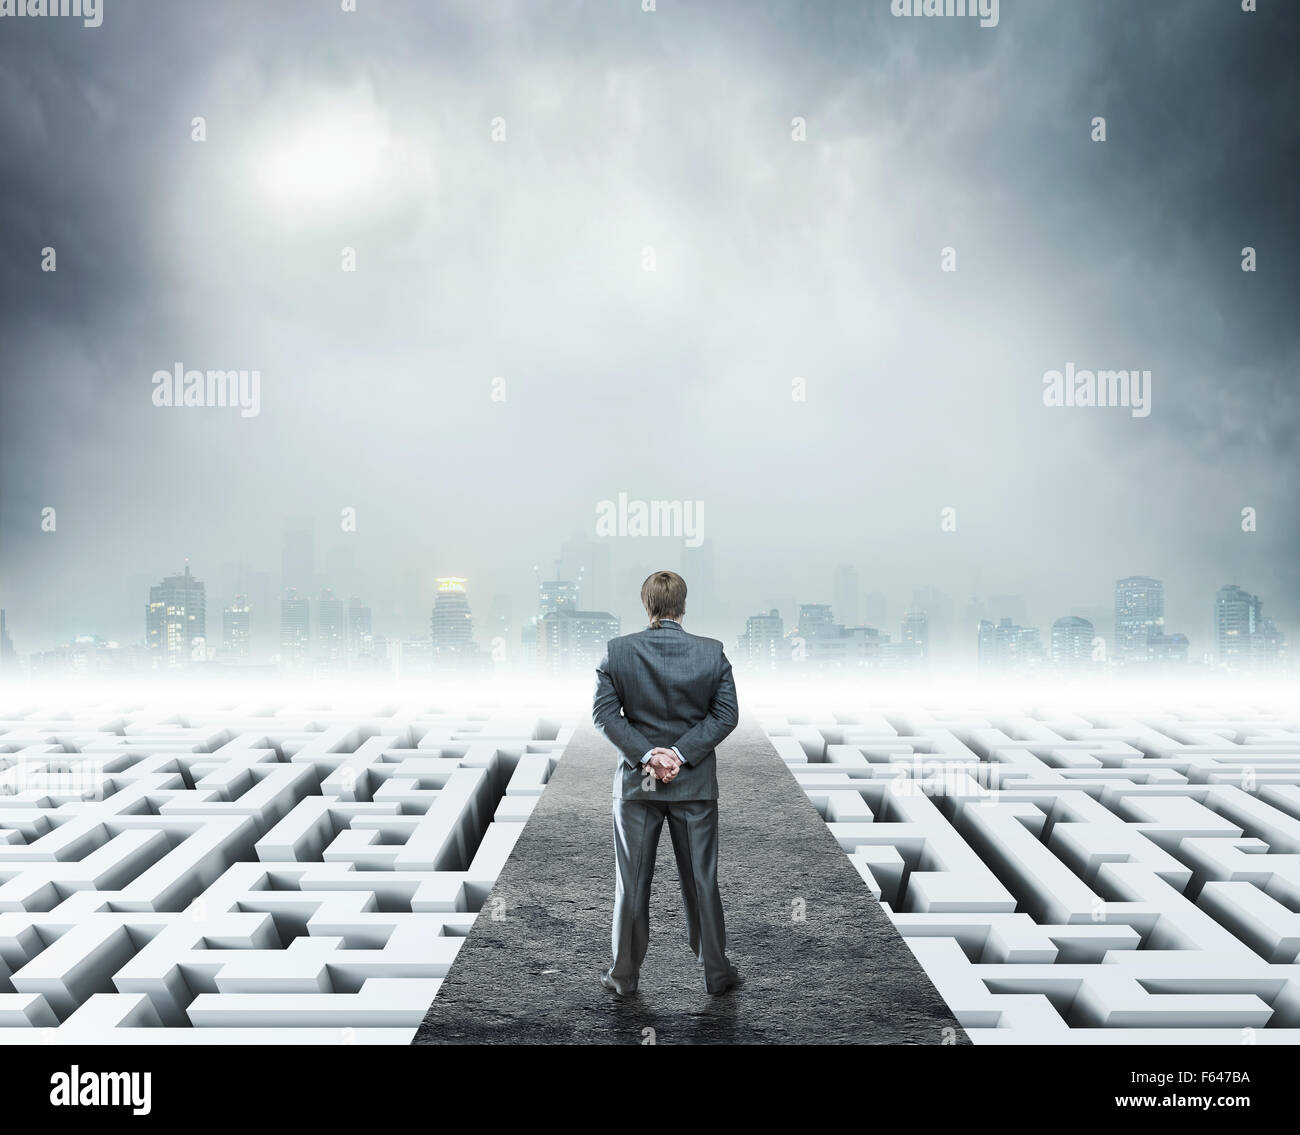 Businessman standing on labyrinth, metaphor for facing difficulties in business and the stress of daily life Stock Photo